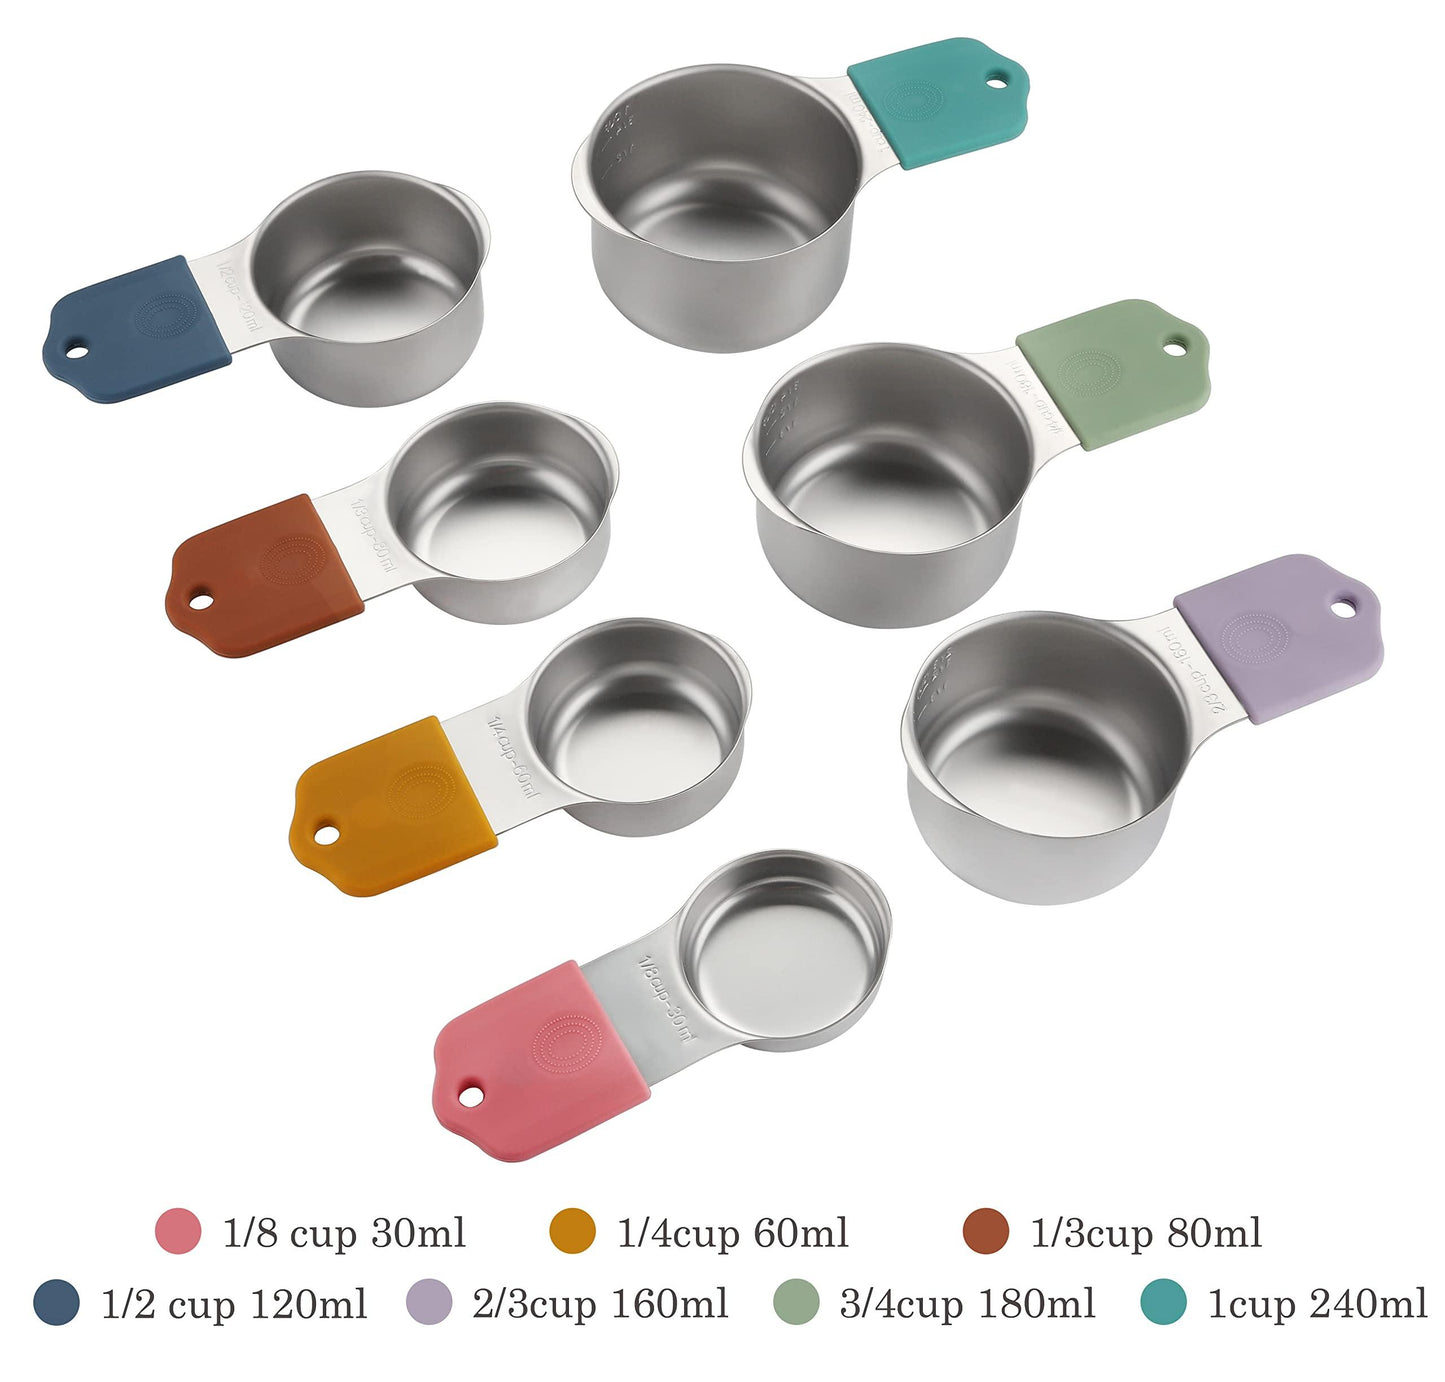 Magnetic Measuring Cups Set of 7 Stainless Steel Heavy Duty Measuring Cups for Dry & Liquid Ingredients (color) - CookCave